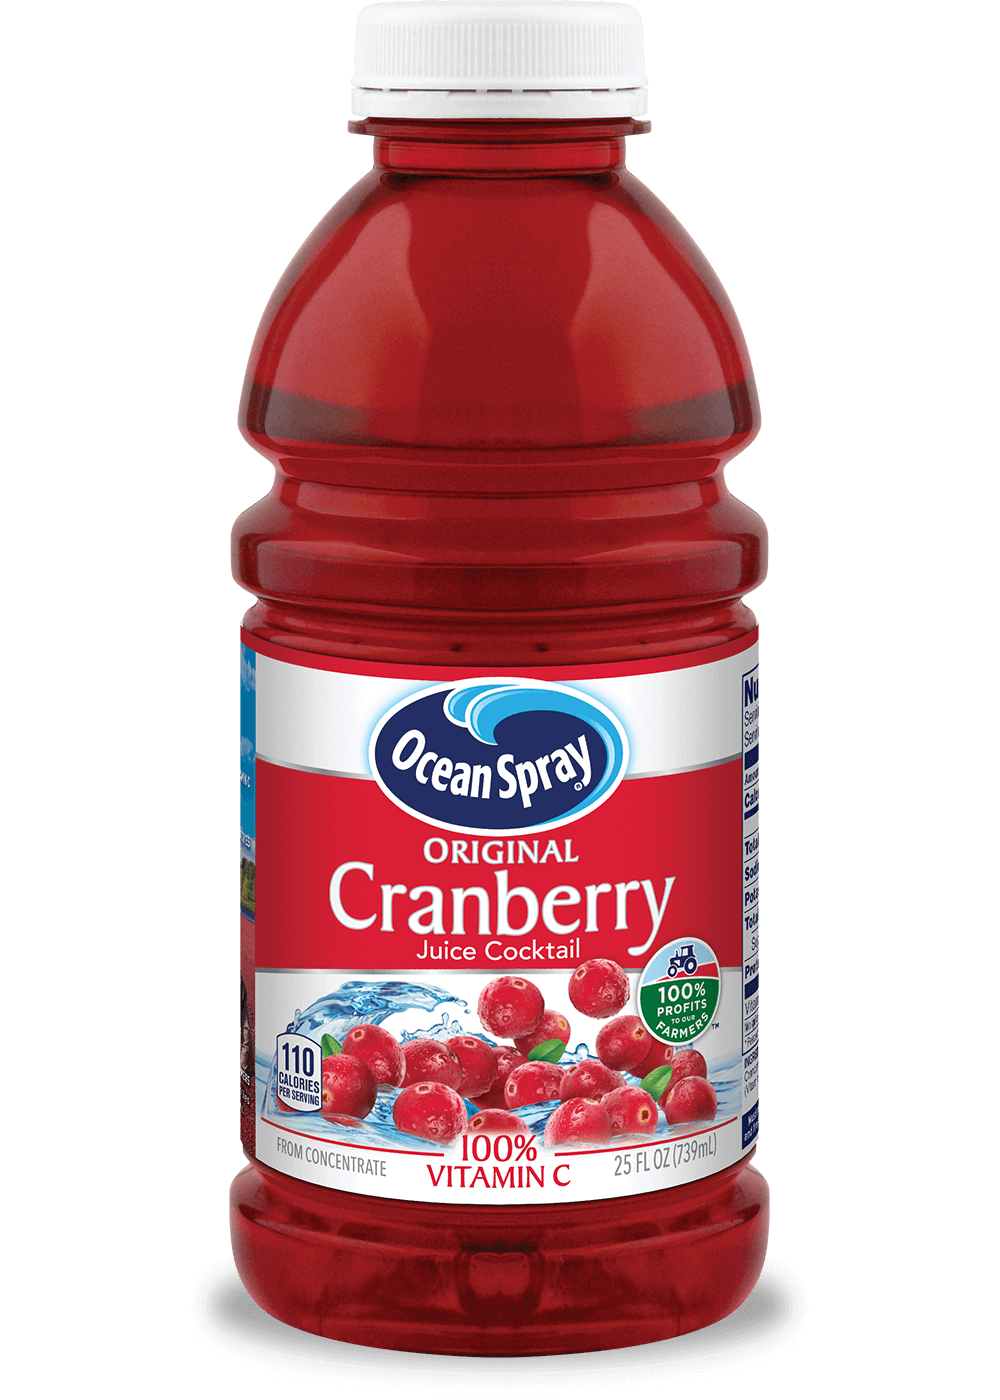 The typical jice blend you will see at the store made from cranberry concentrate.